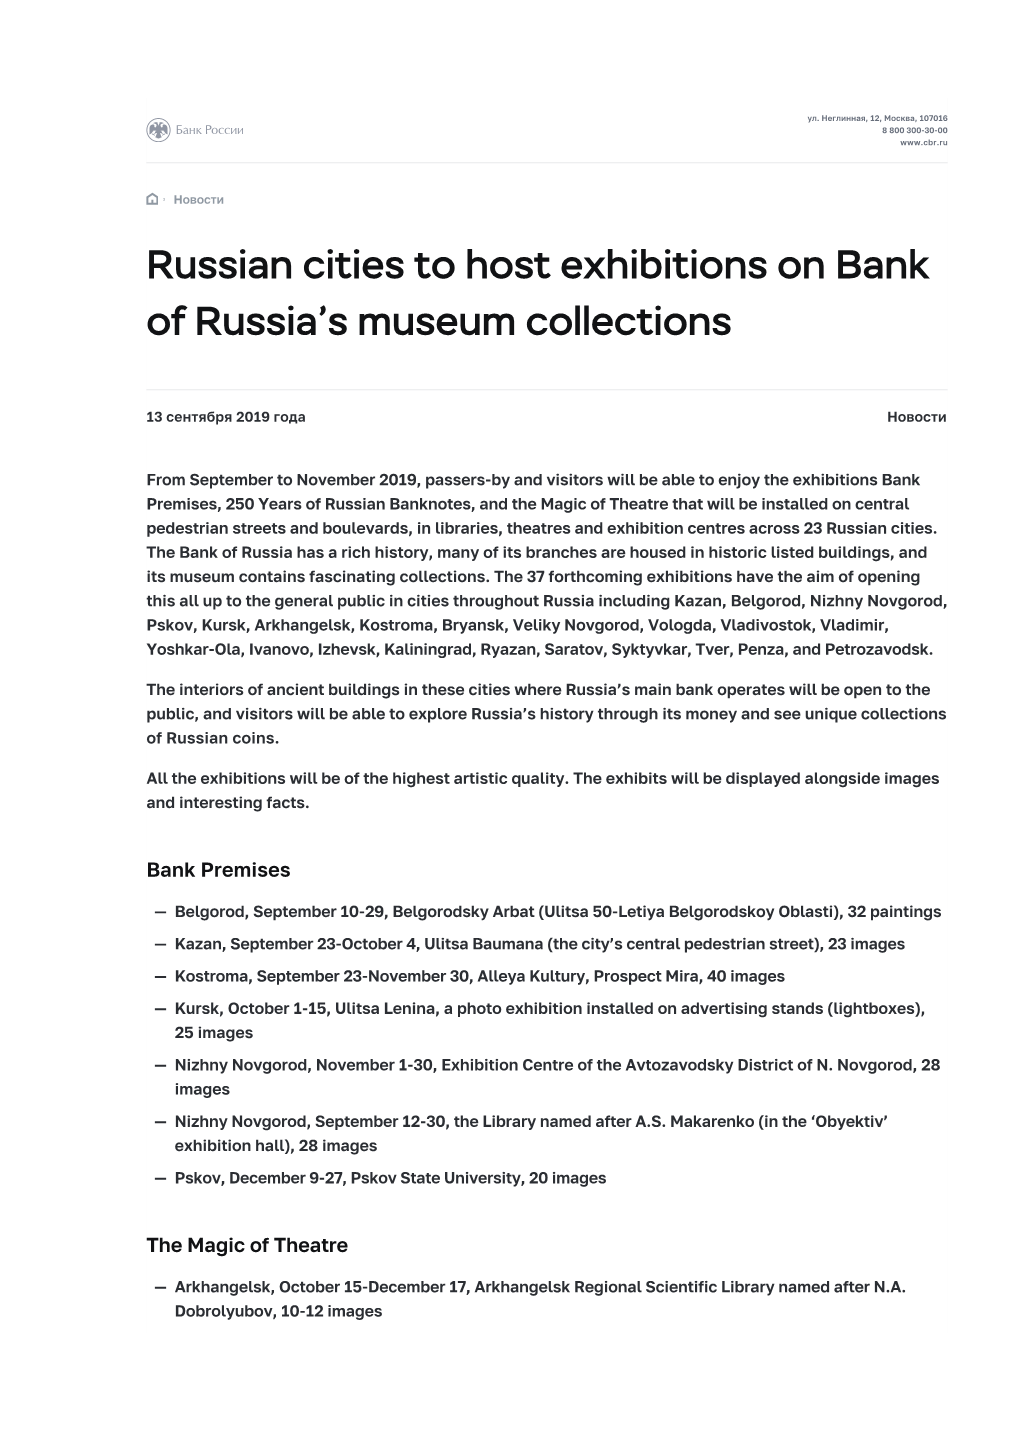 Russian Cities to Host Exhibitions on Bank of Russia's Museum